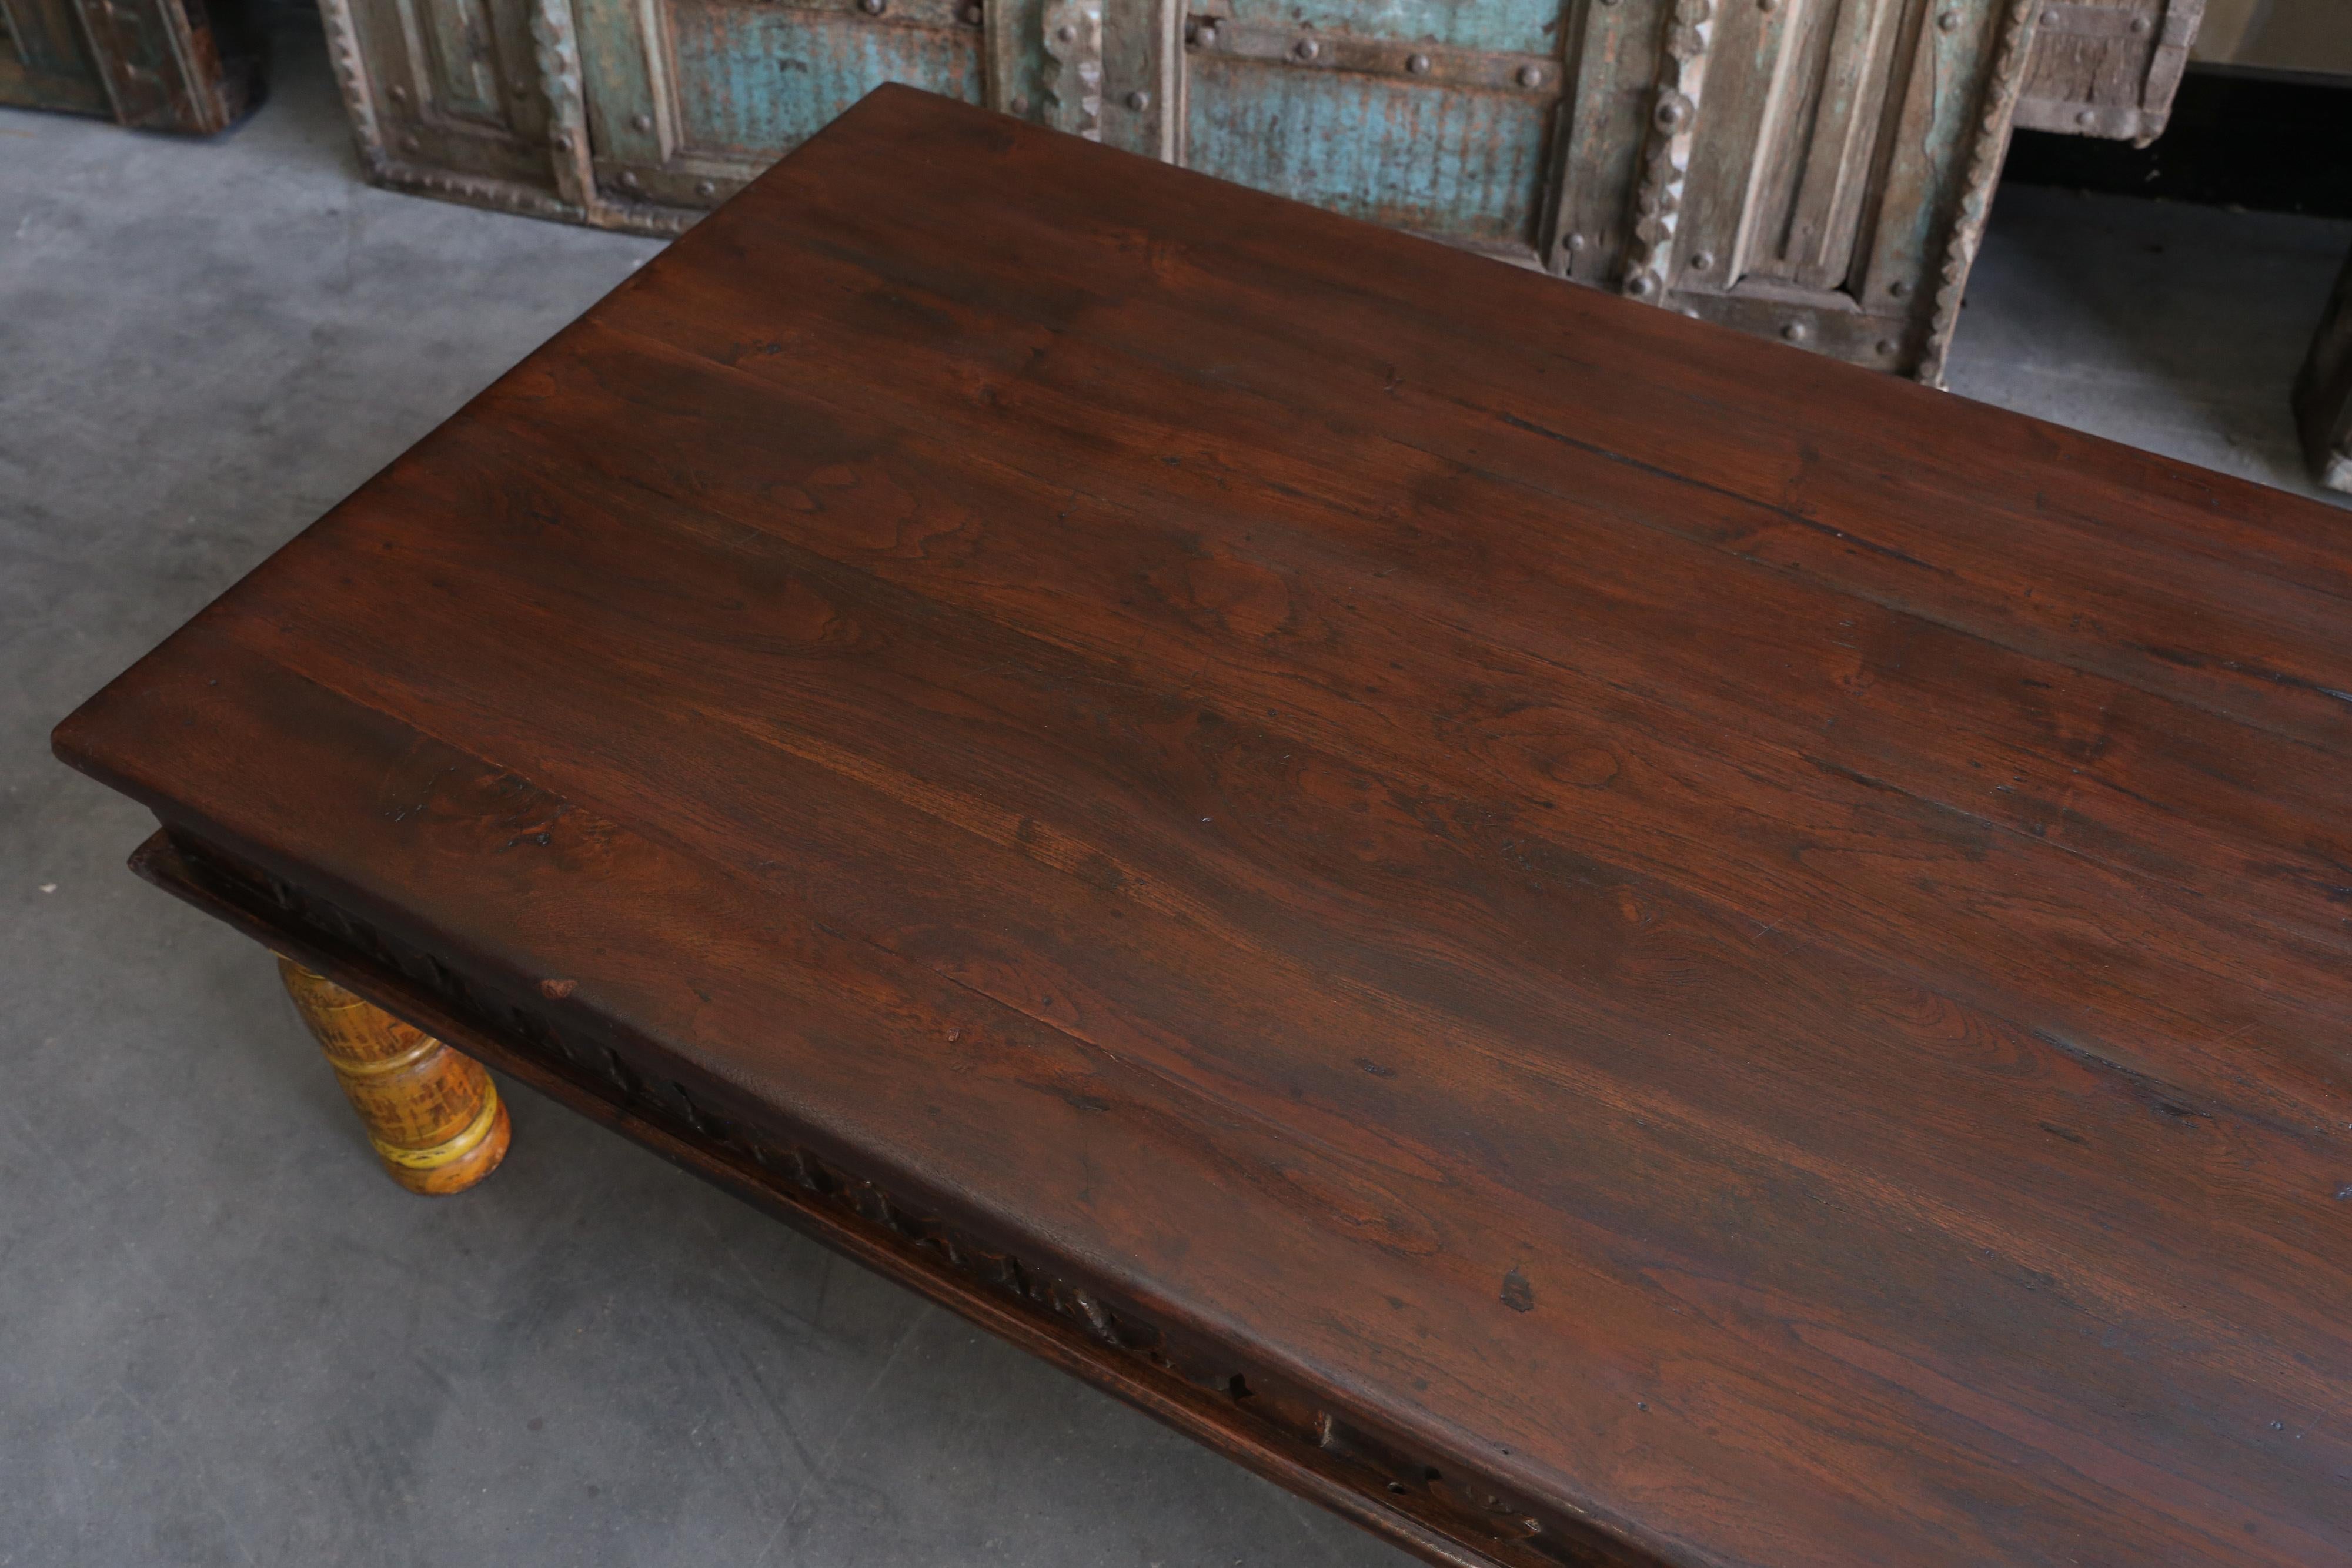 19th Century Idealistic Solid Teak Wood Coffee Table from a Tea Plantation For Sale 2